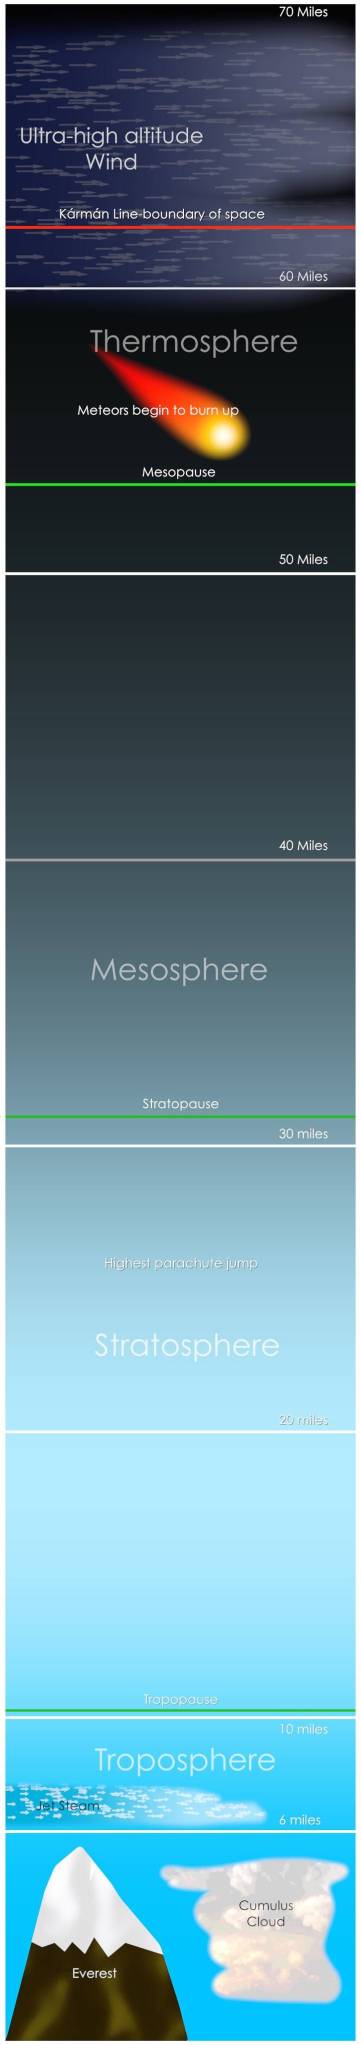 Earth's atmosphere consists of different layers made of different particles